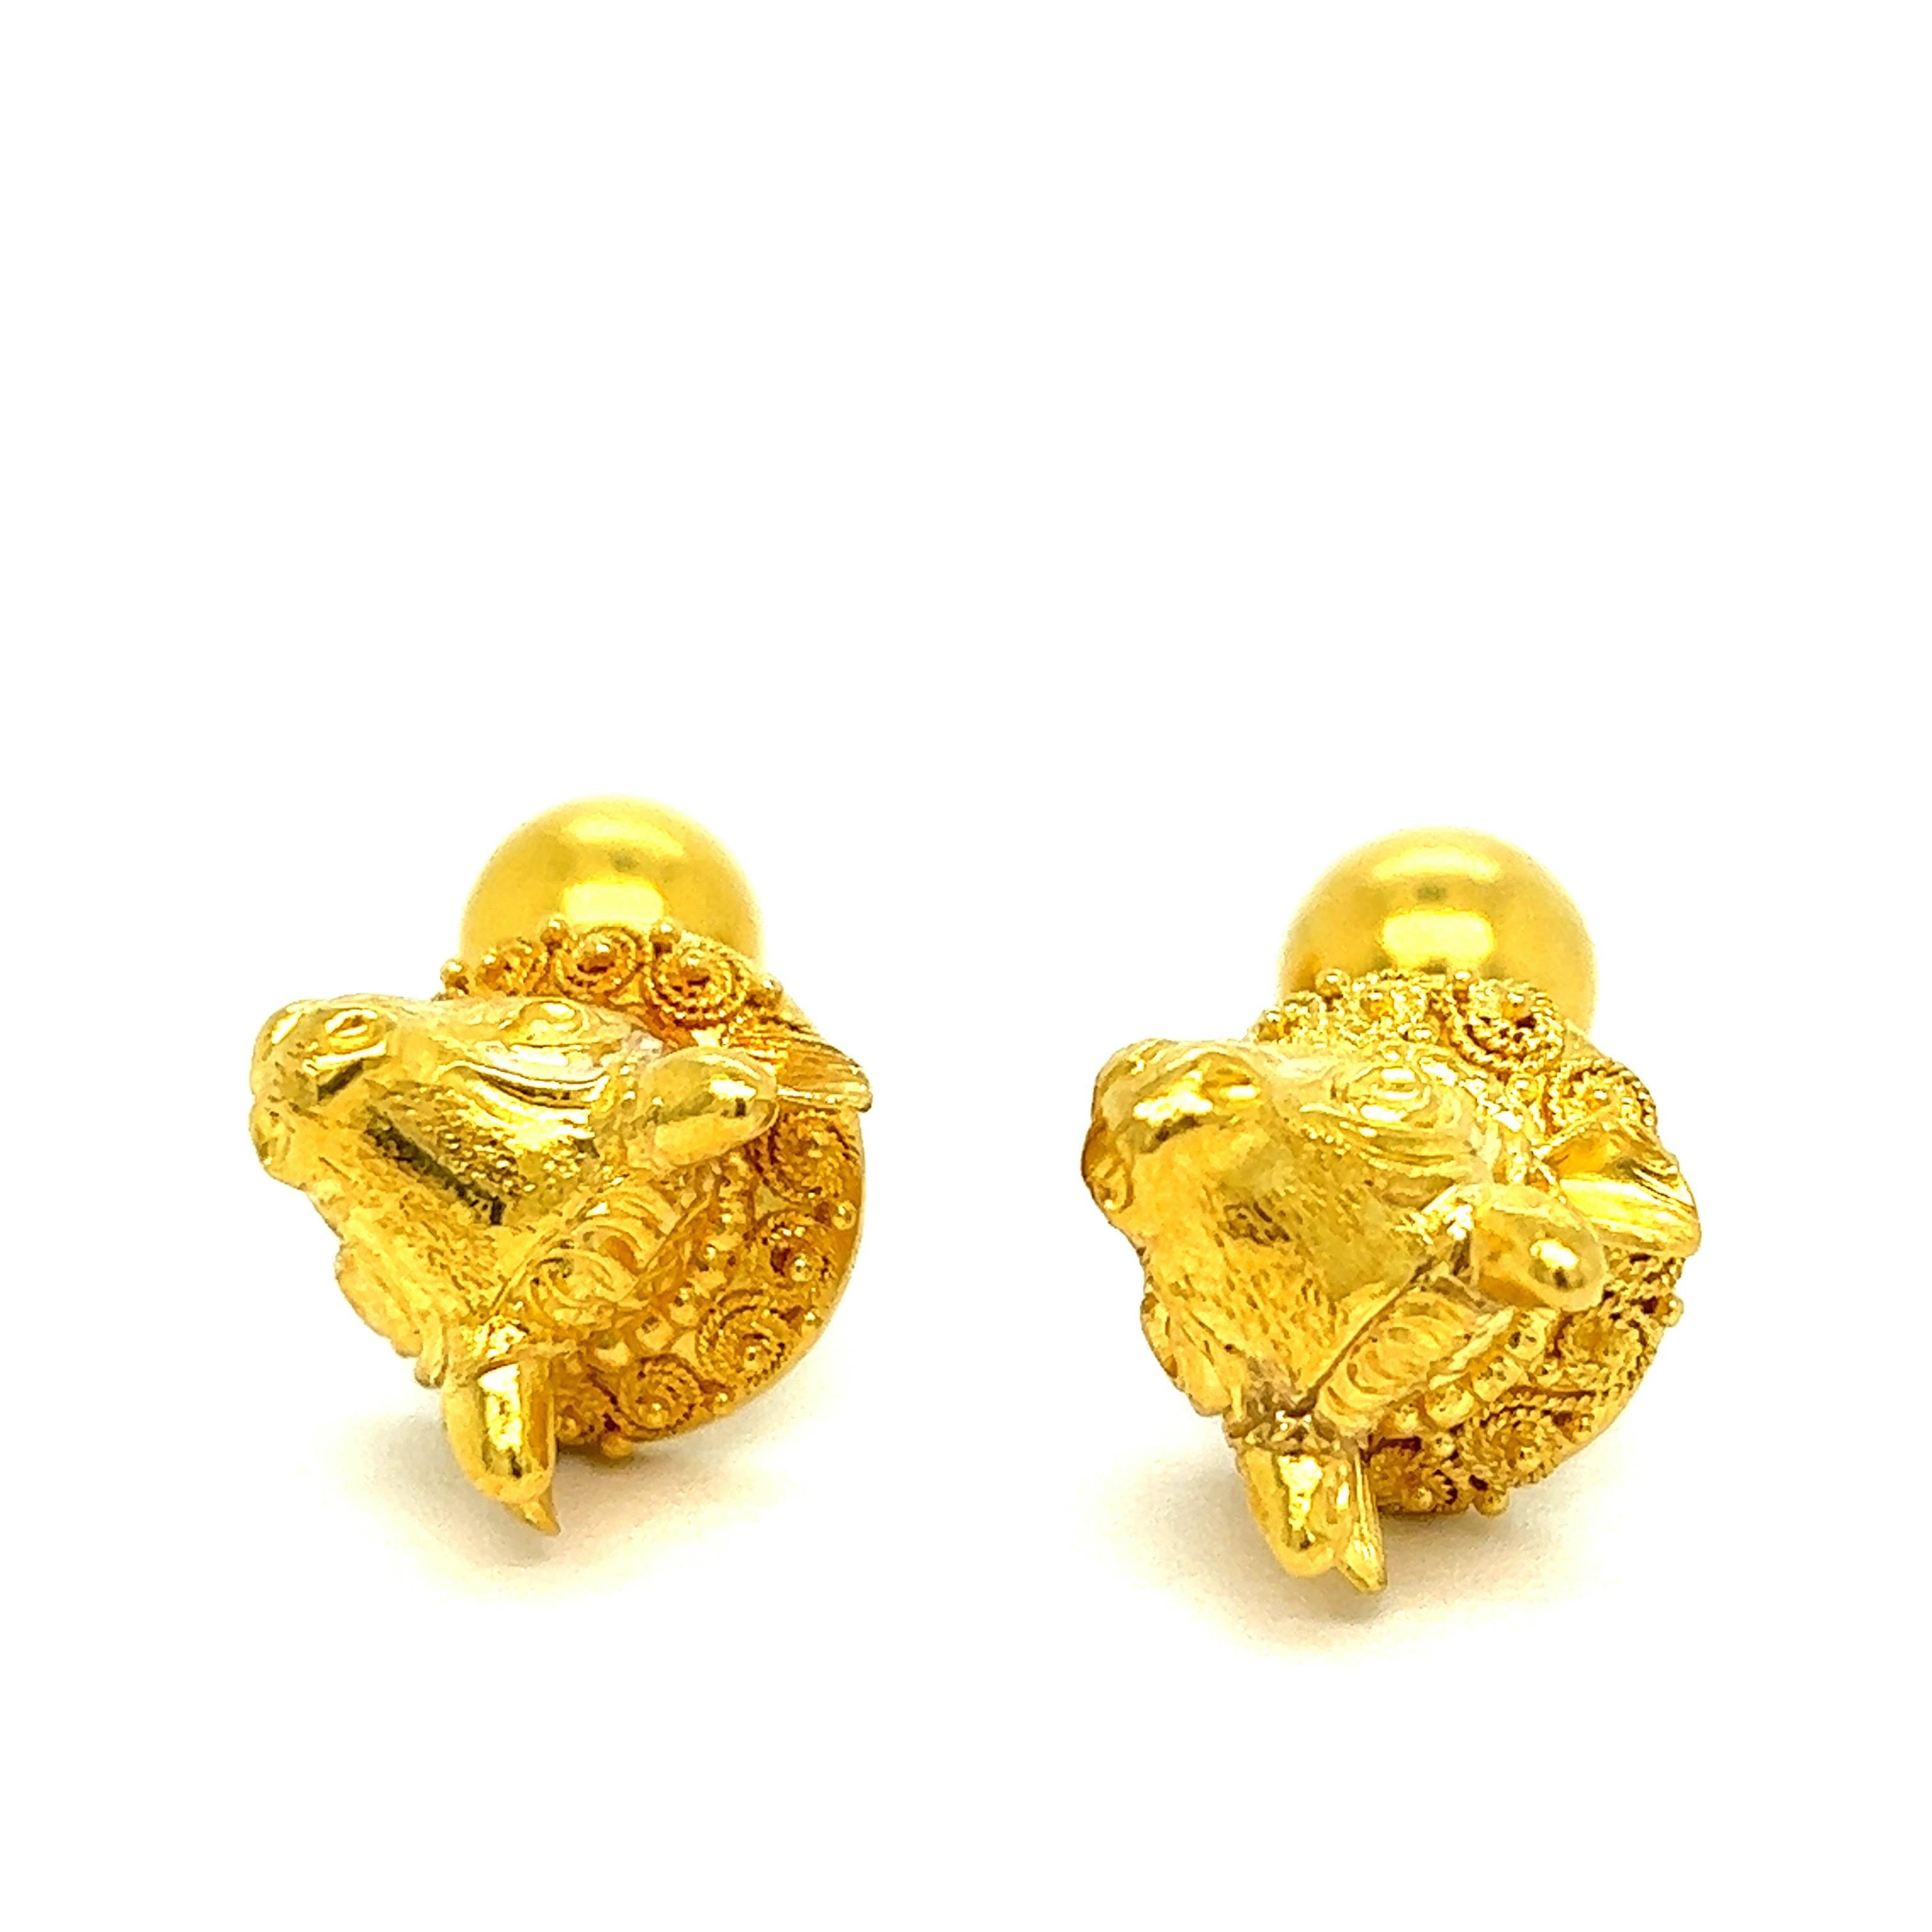 Lalaounis bull head cufflinks

Bull head motif with round ends, 18 karat yellow gold; marked 750, Lalaounis maker's mark

Size: width 14 mm, length mm
Total weight: 16.3 grams